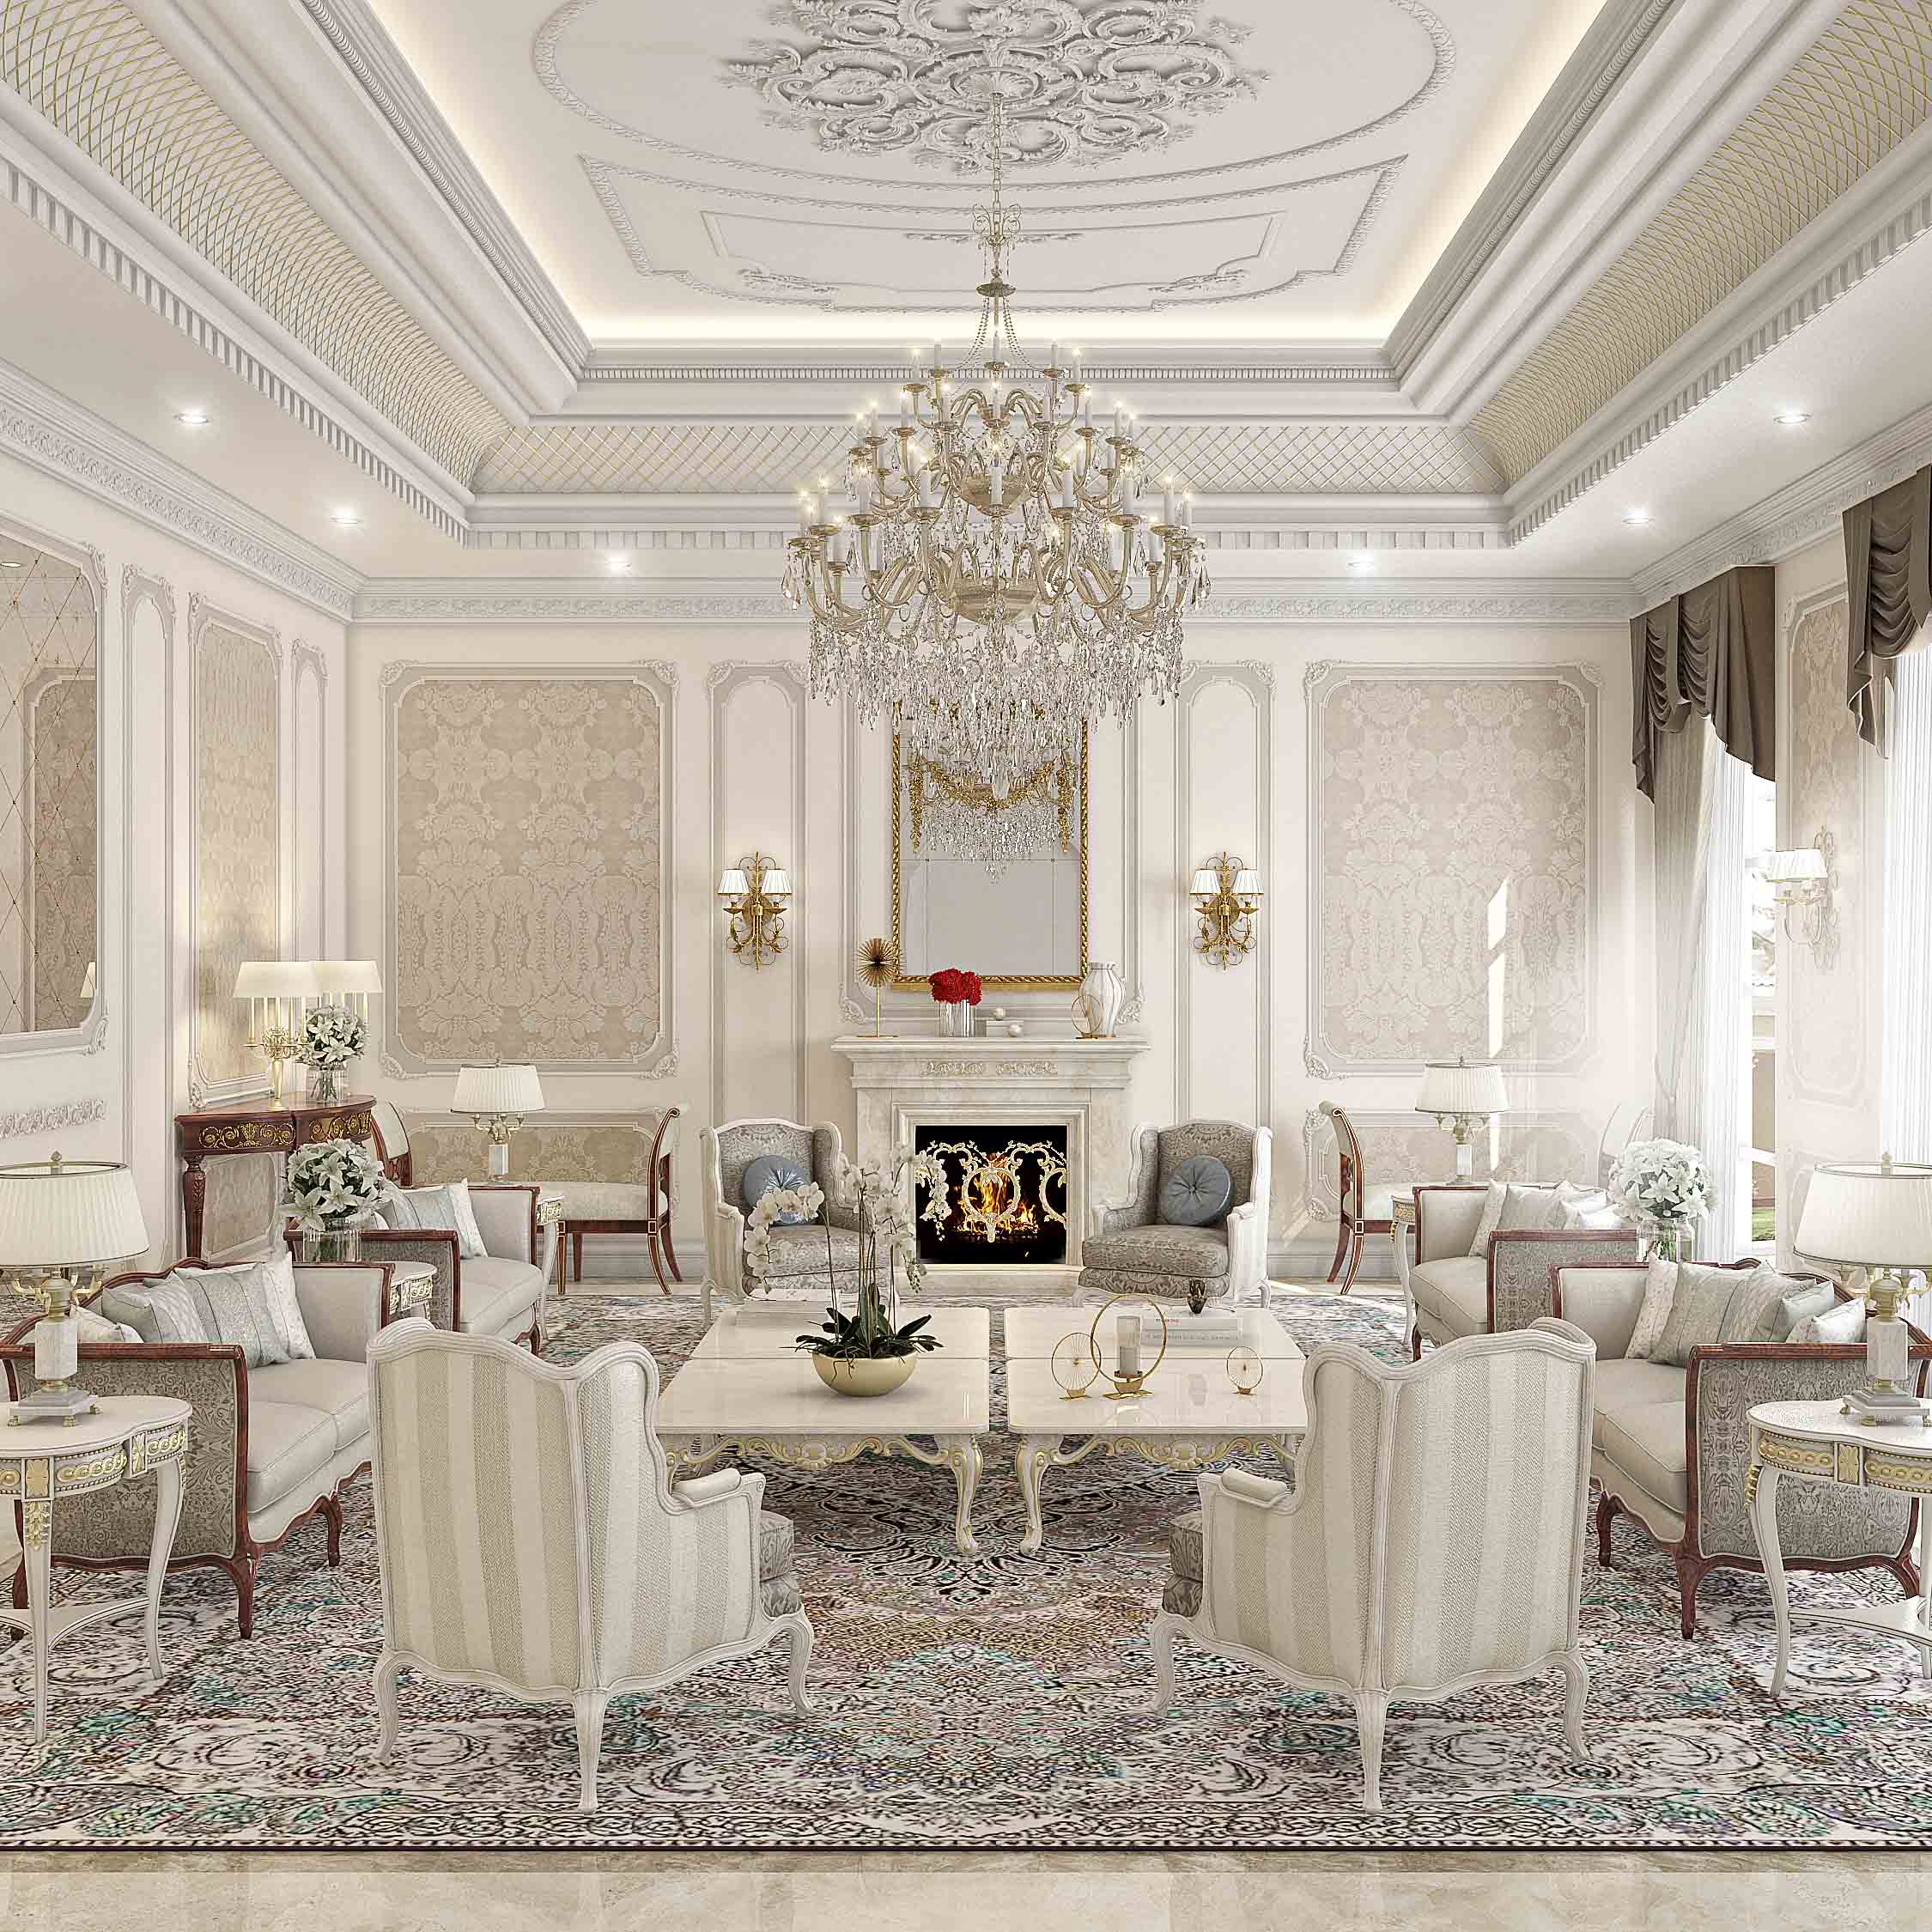 Elegant Interiors: A Refined Touch Of Luxury